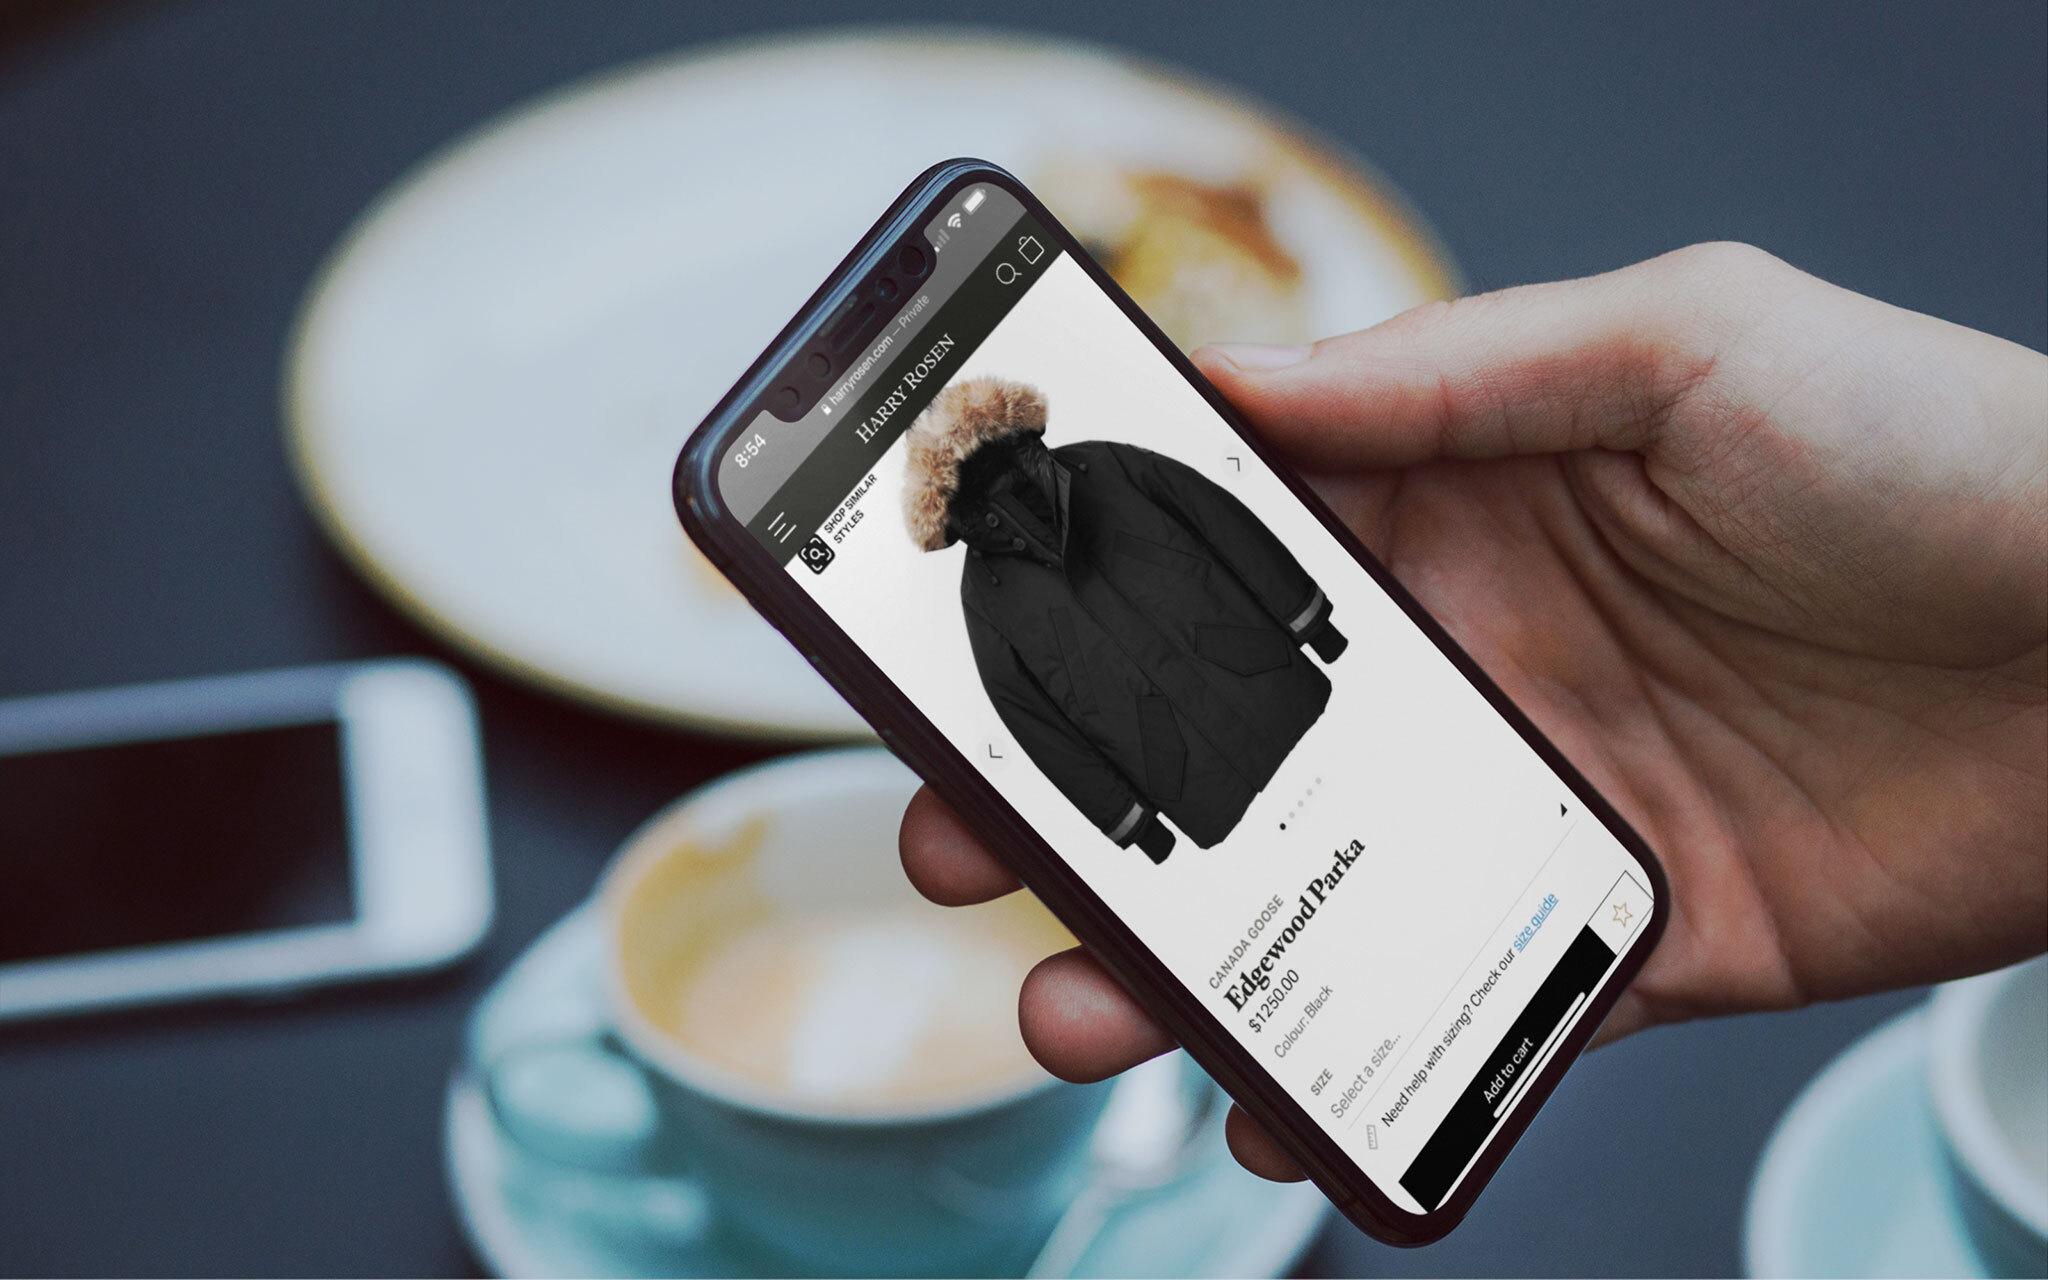 A hand holding a mobile phone browsing the Harry Rosen site. The display shows a parka that a customer can purchase online.